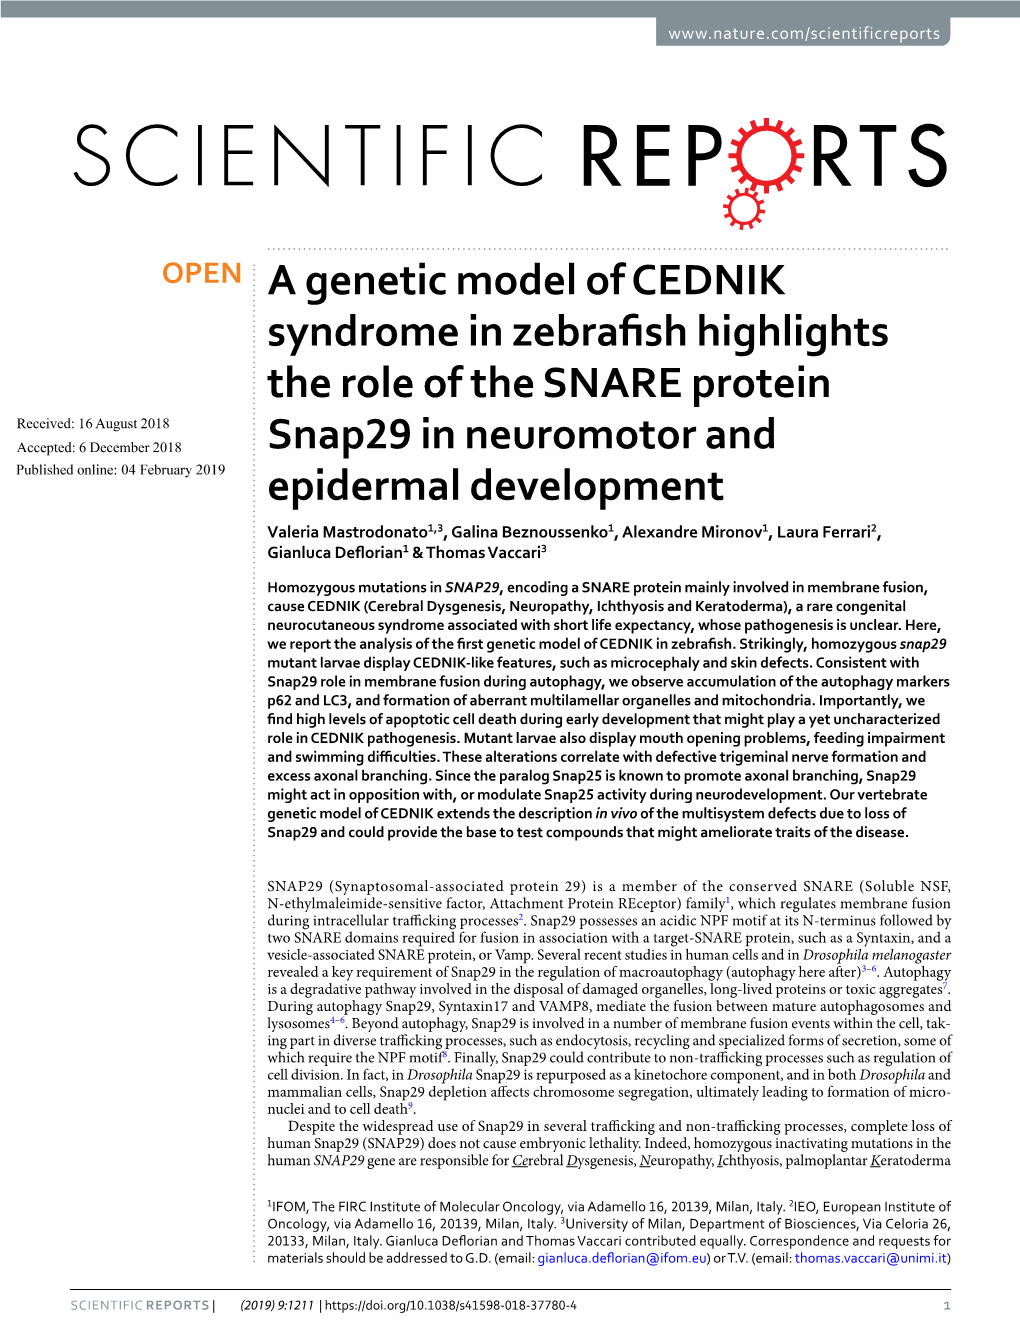 A Genetic Model of CEDNIK Syndrome in Zebrafish Highlights the Role Of